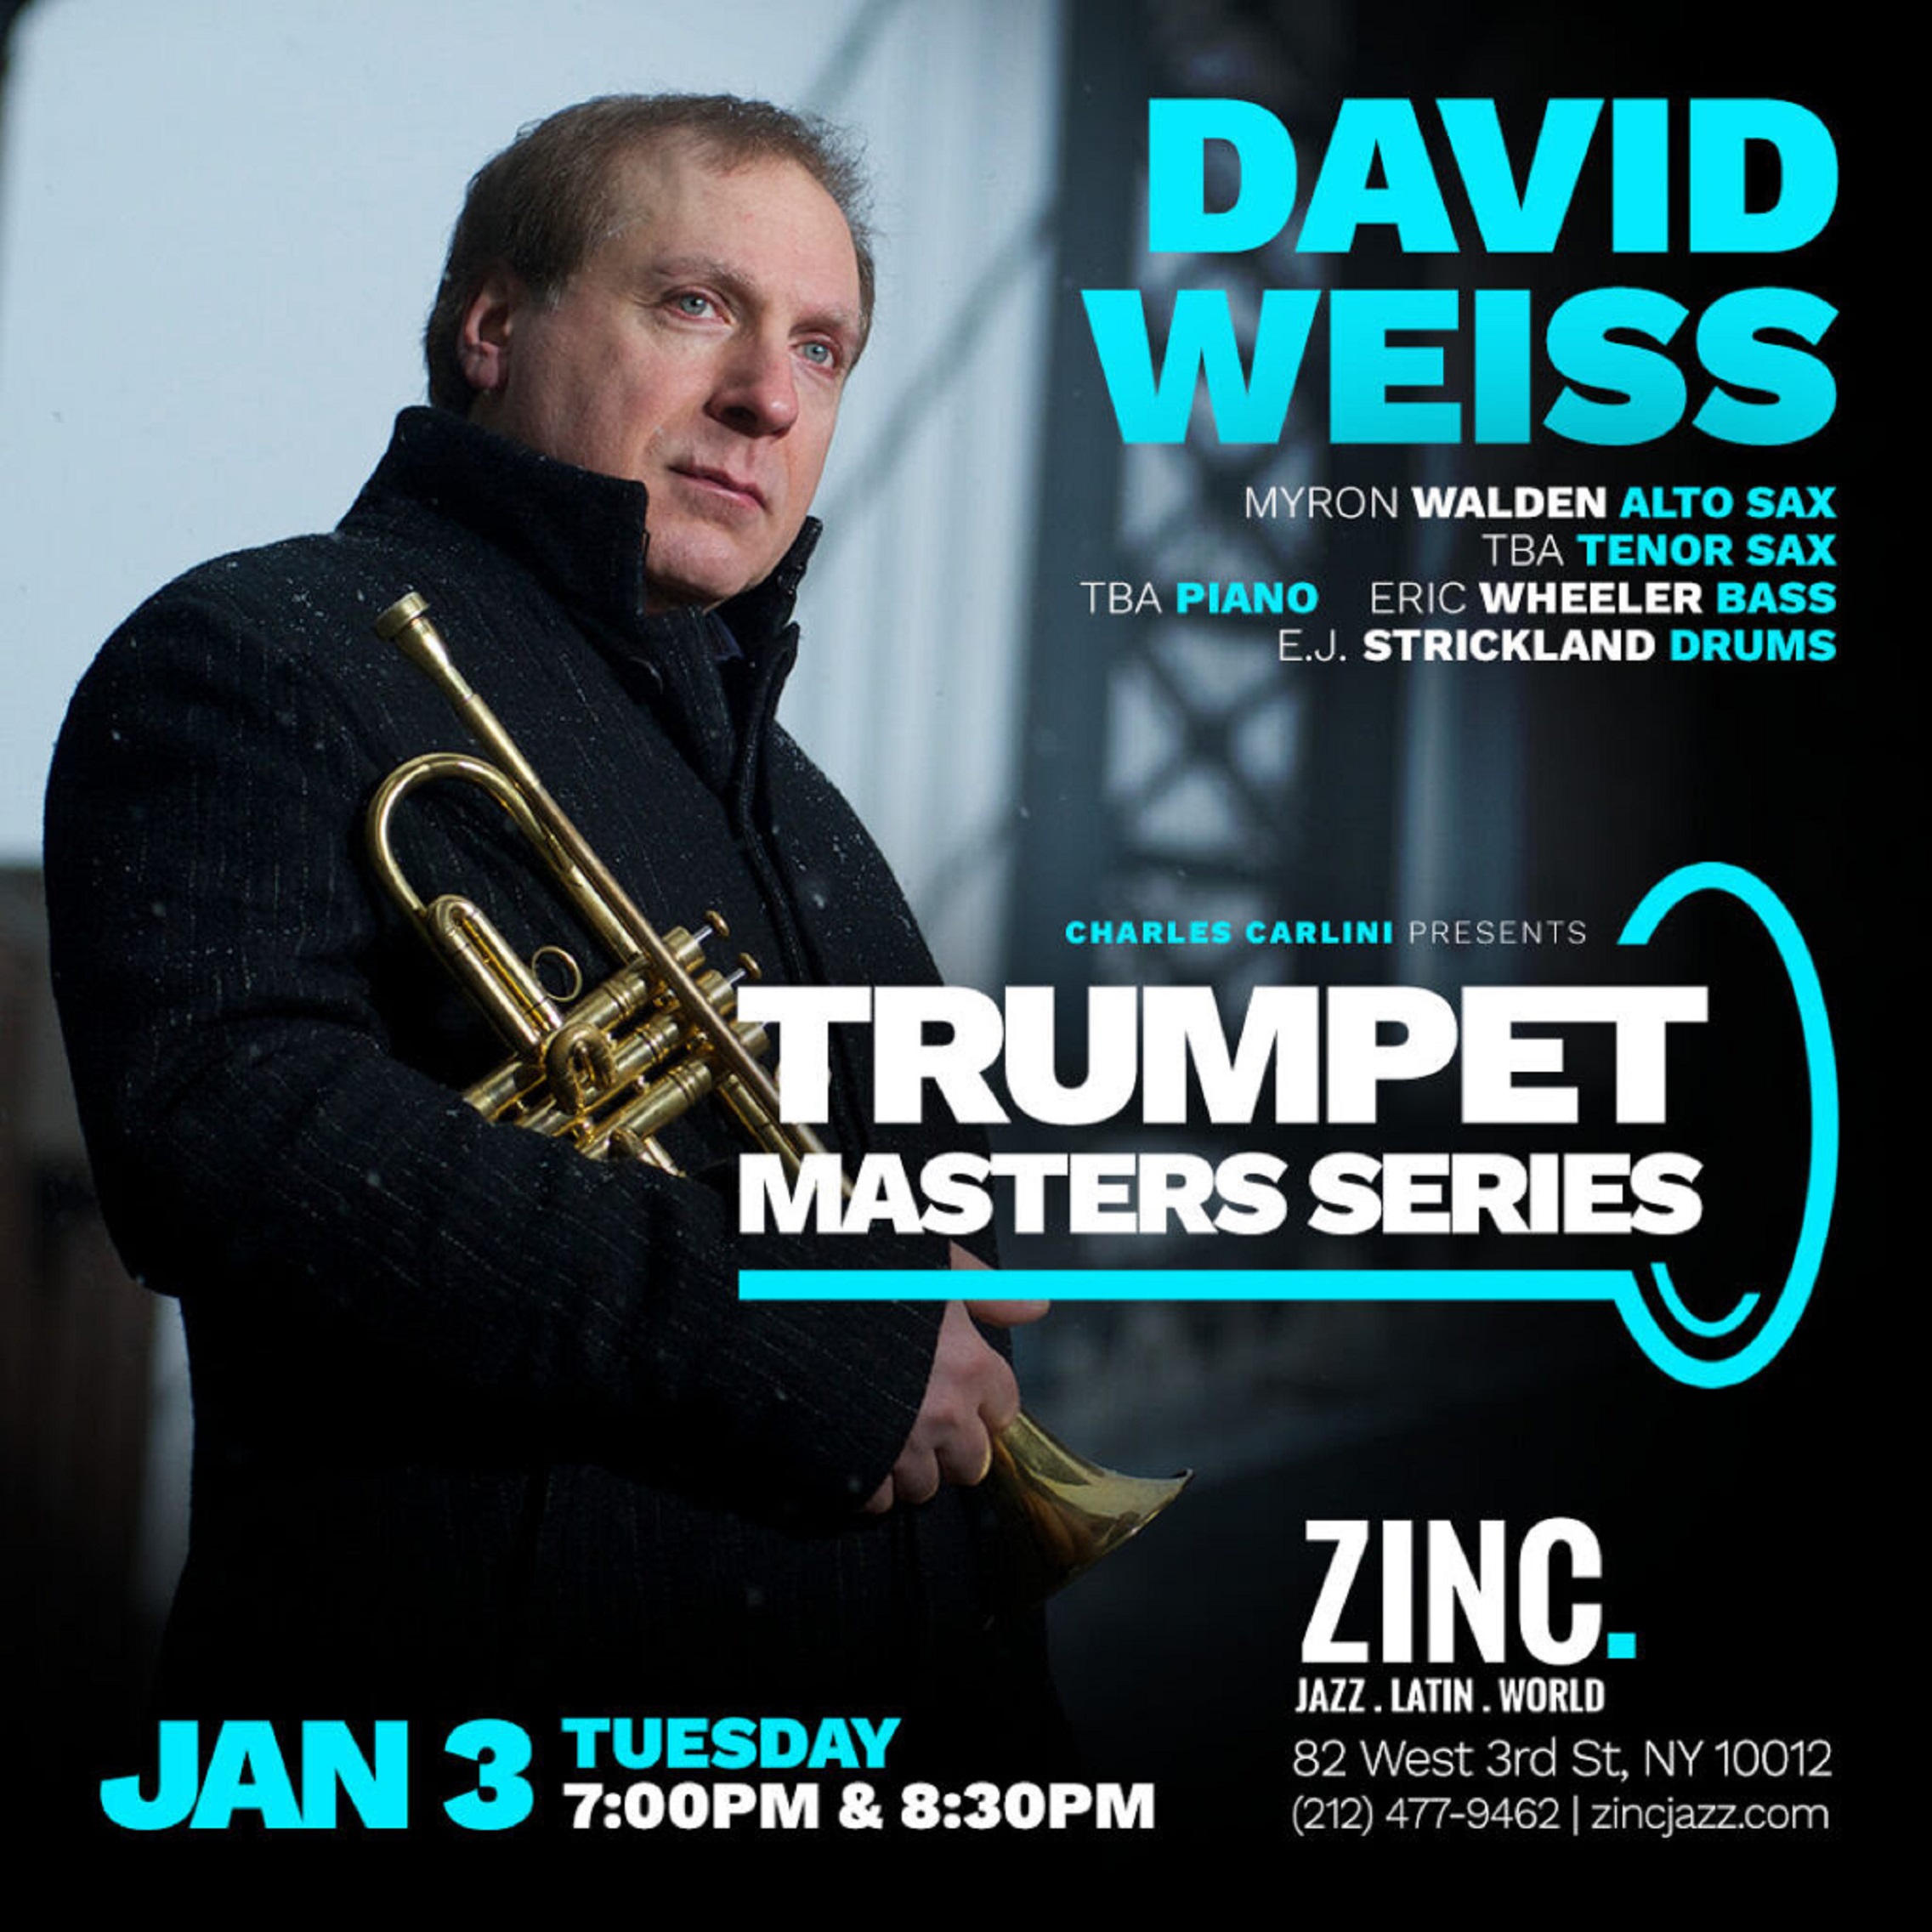 Catch Acclaimed Trumpet Master David Weiss at Zinc on Tuesday, January 3